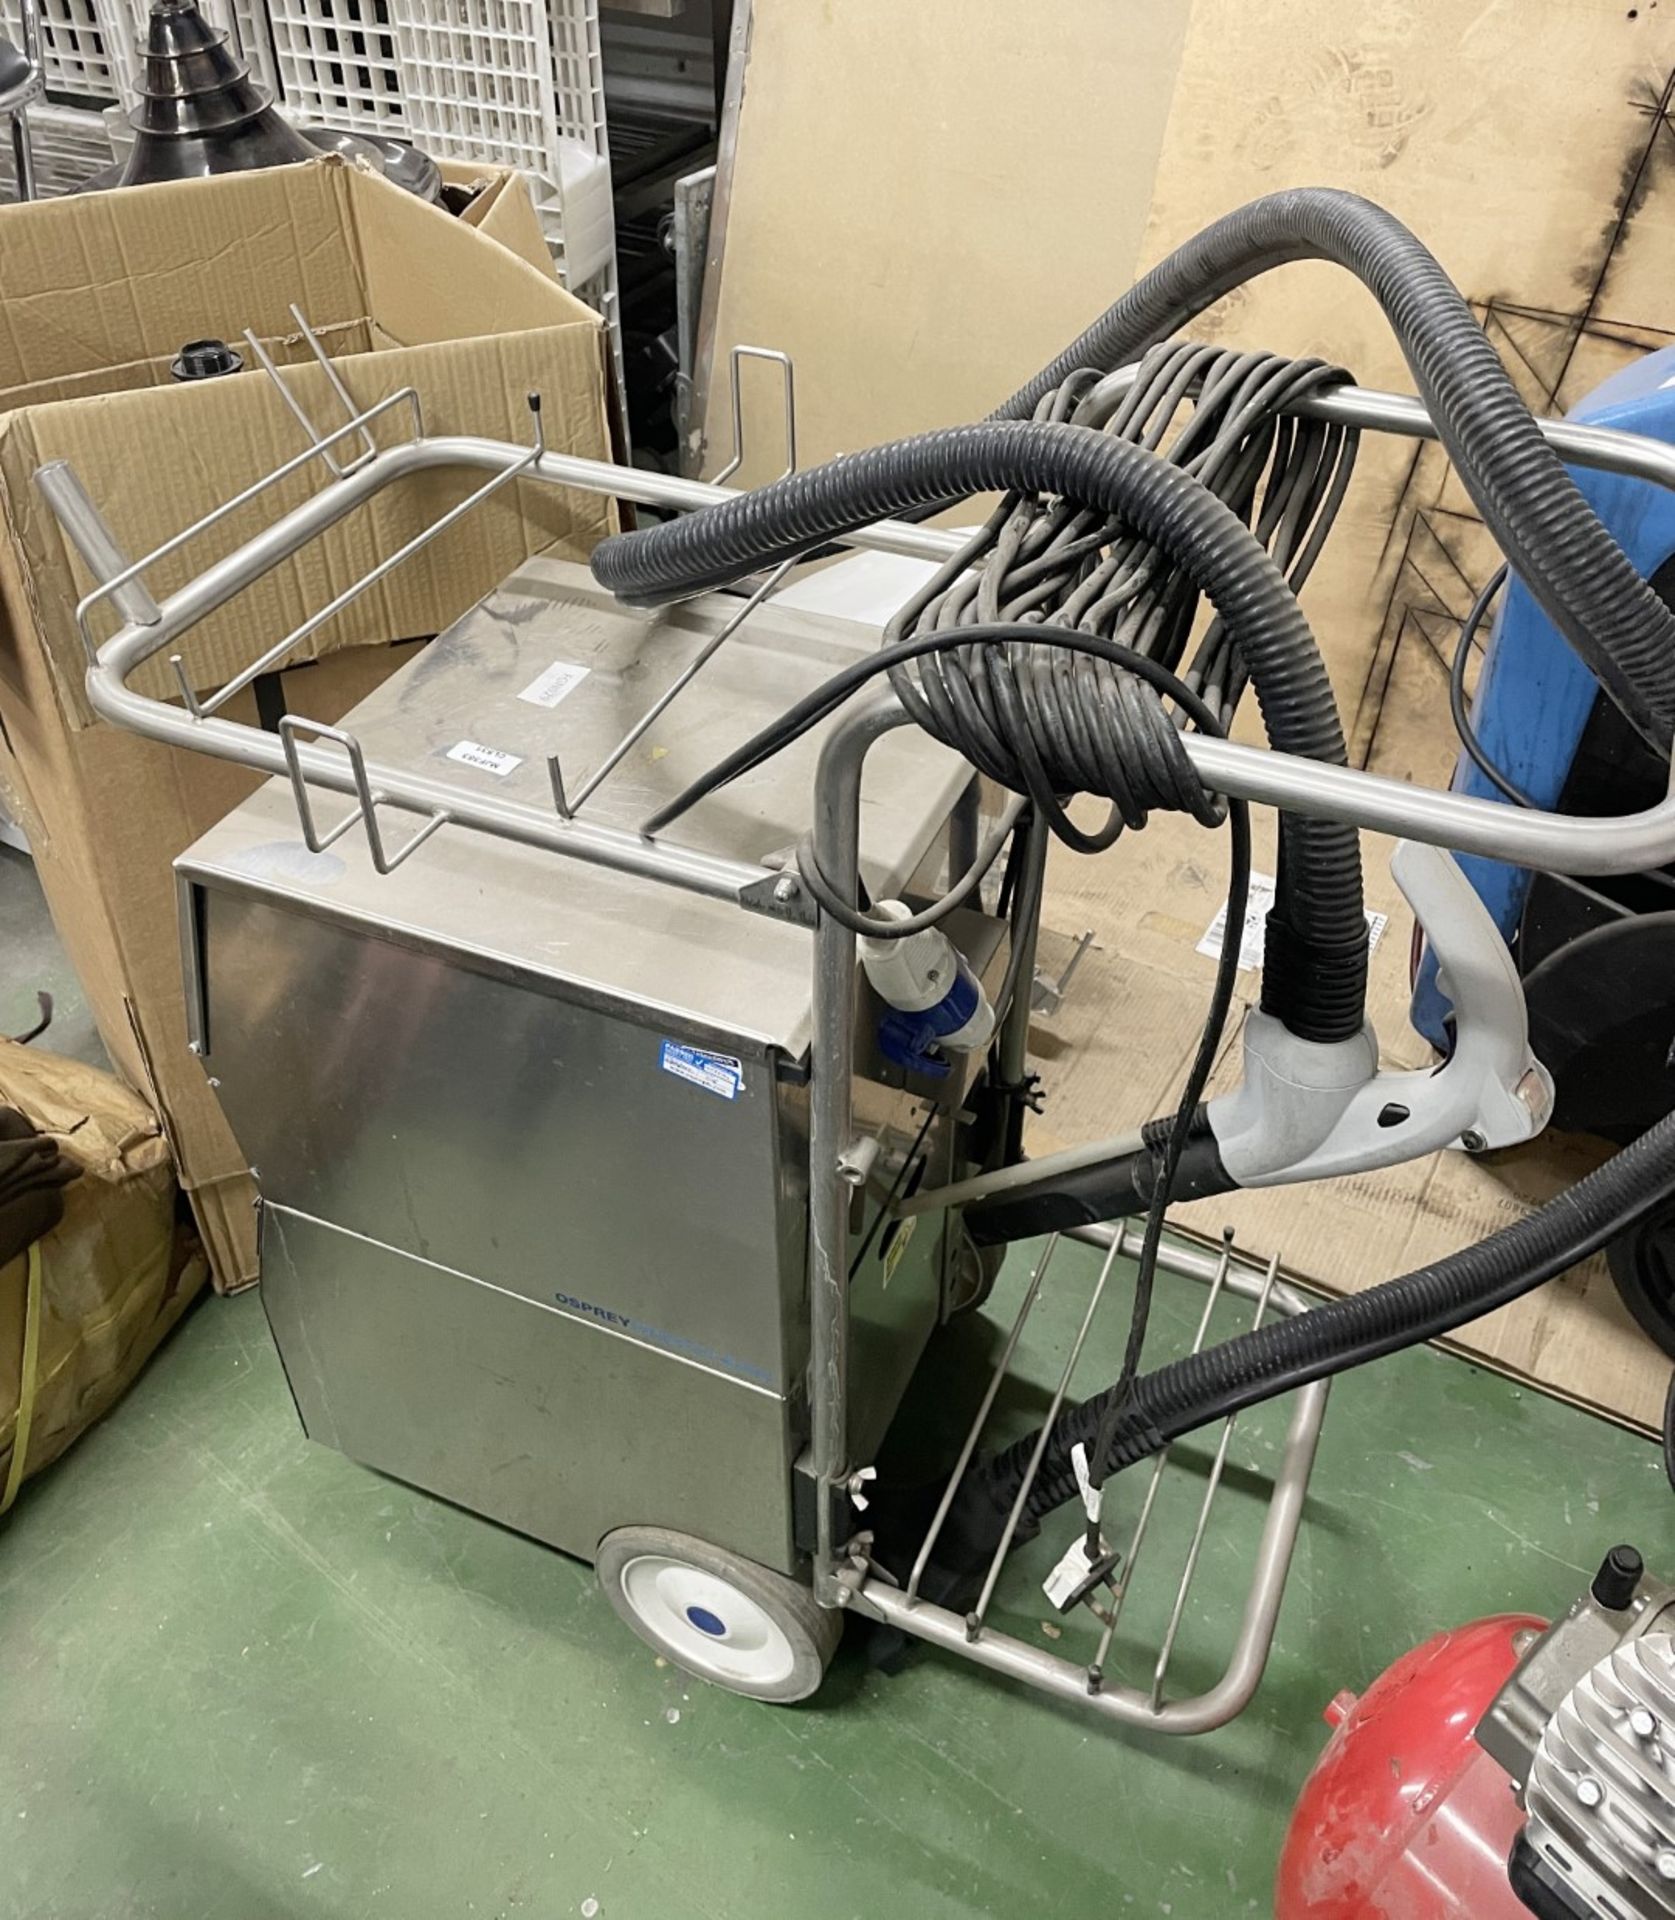 1 x Osprey Deep Clean Provap 7 VAC Steam Cleaner - Removed From a Working Environment - CL011 - Ref: - Image 5 of 9